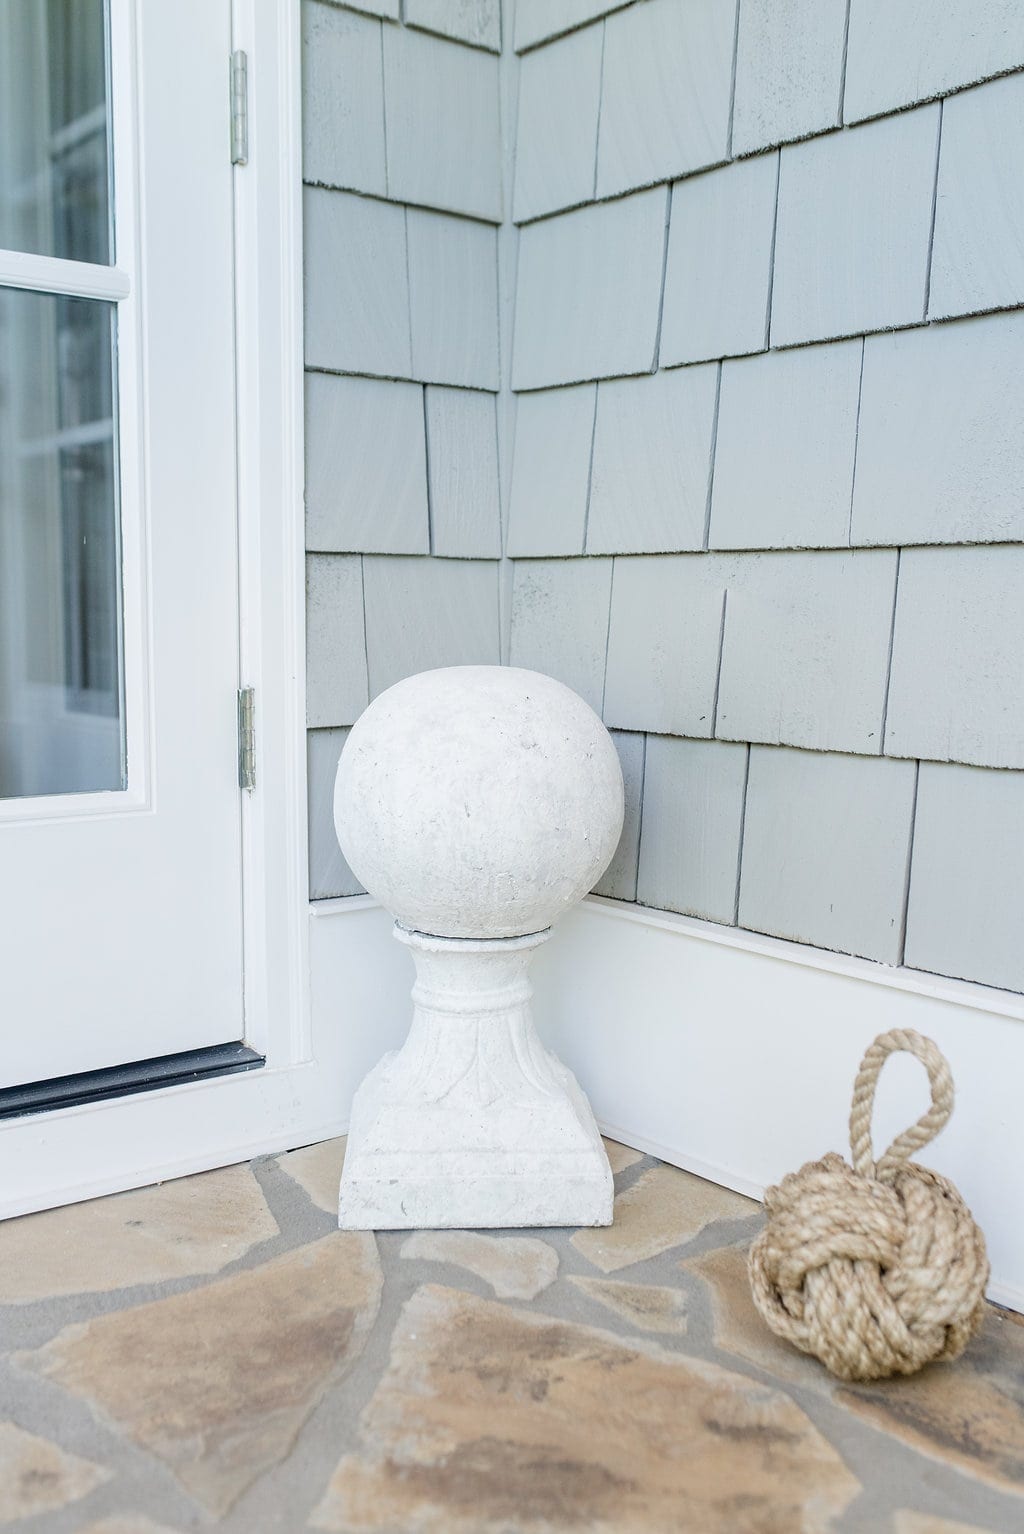 Knot door stopper and white ceramic finial.